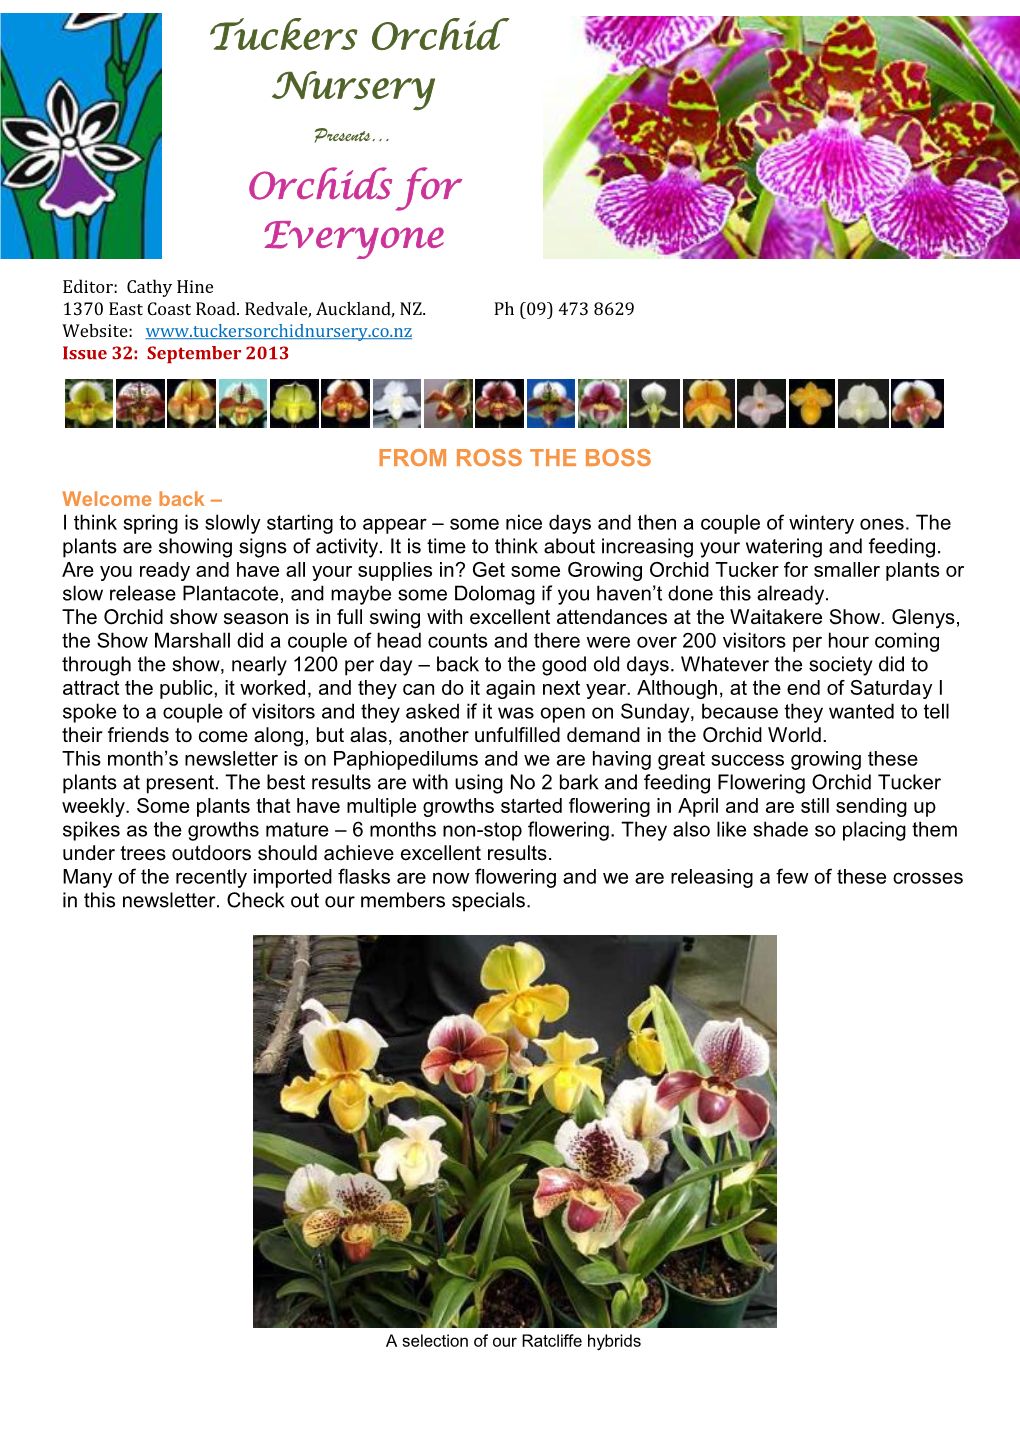 Orchids for Everyone Sept 2013 Paphs.Pdf